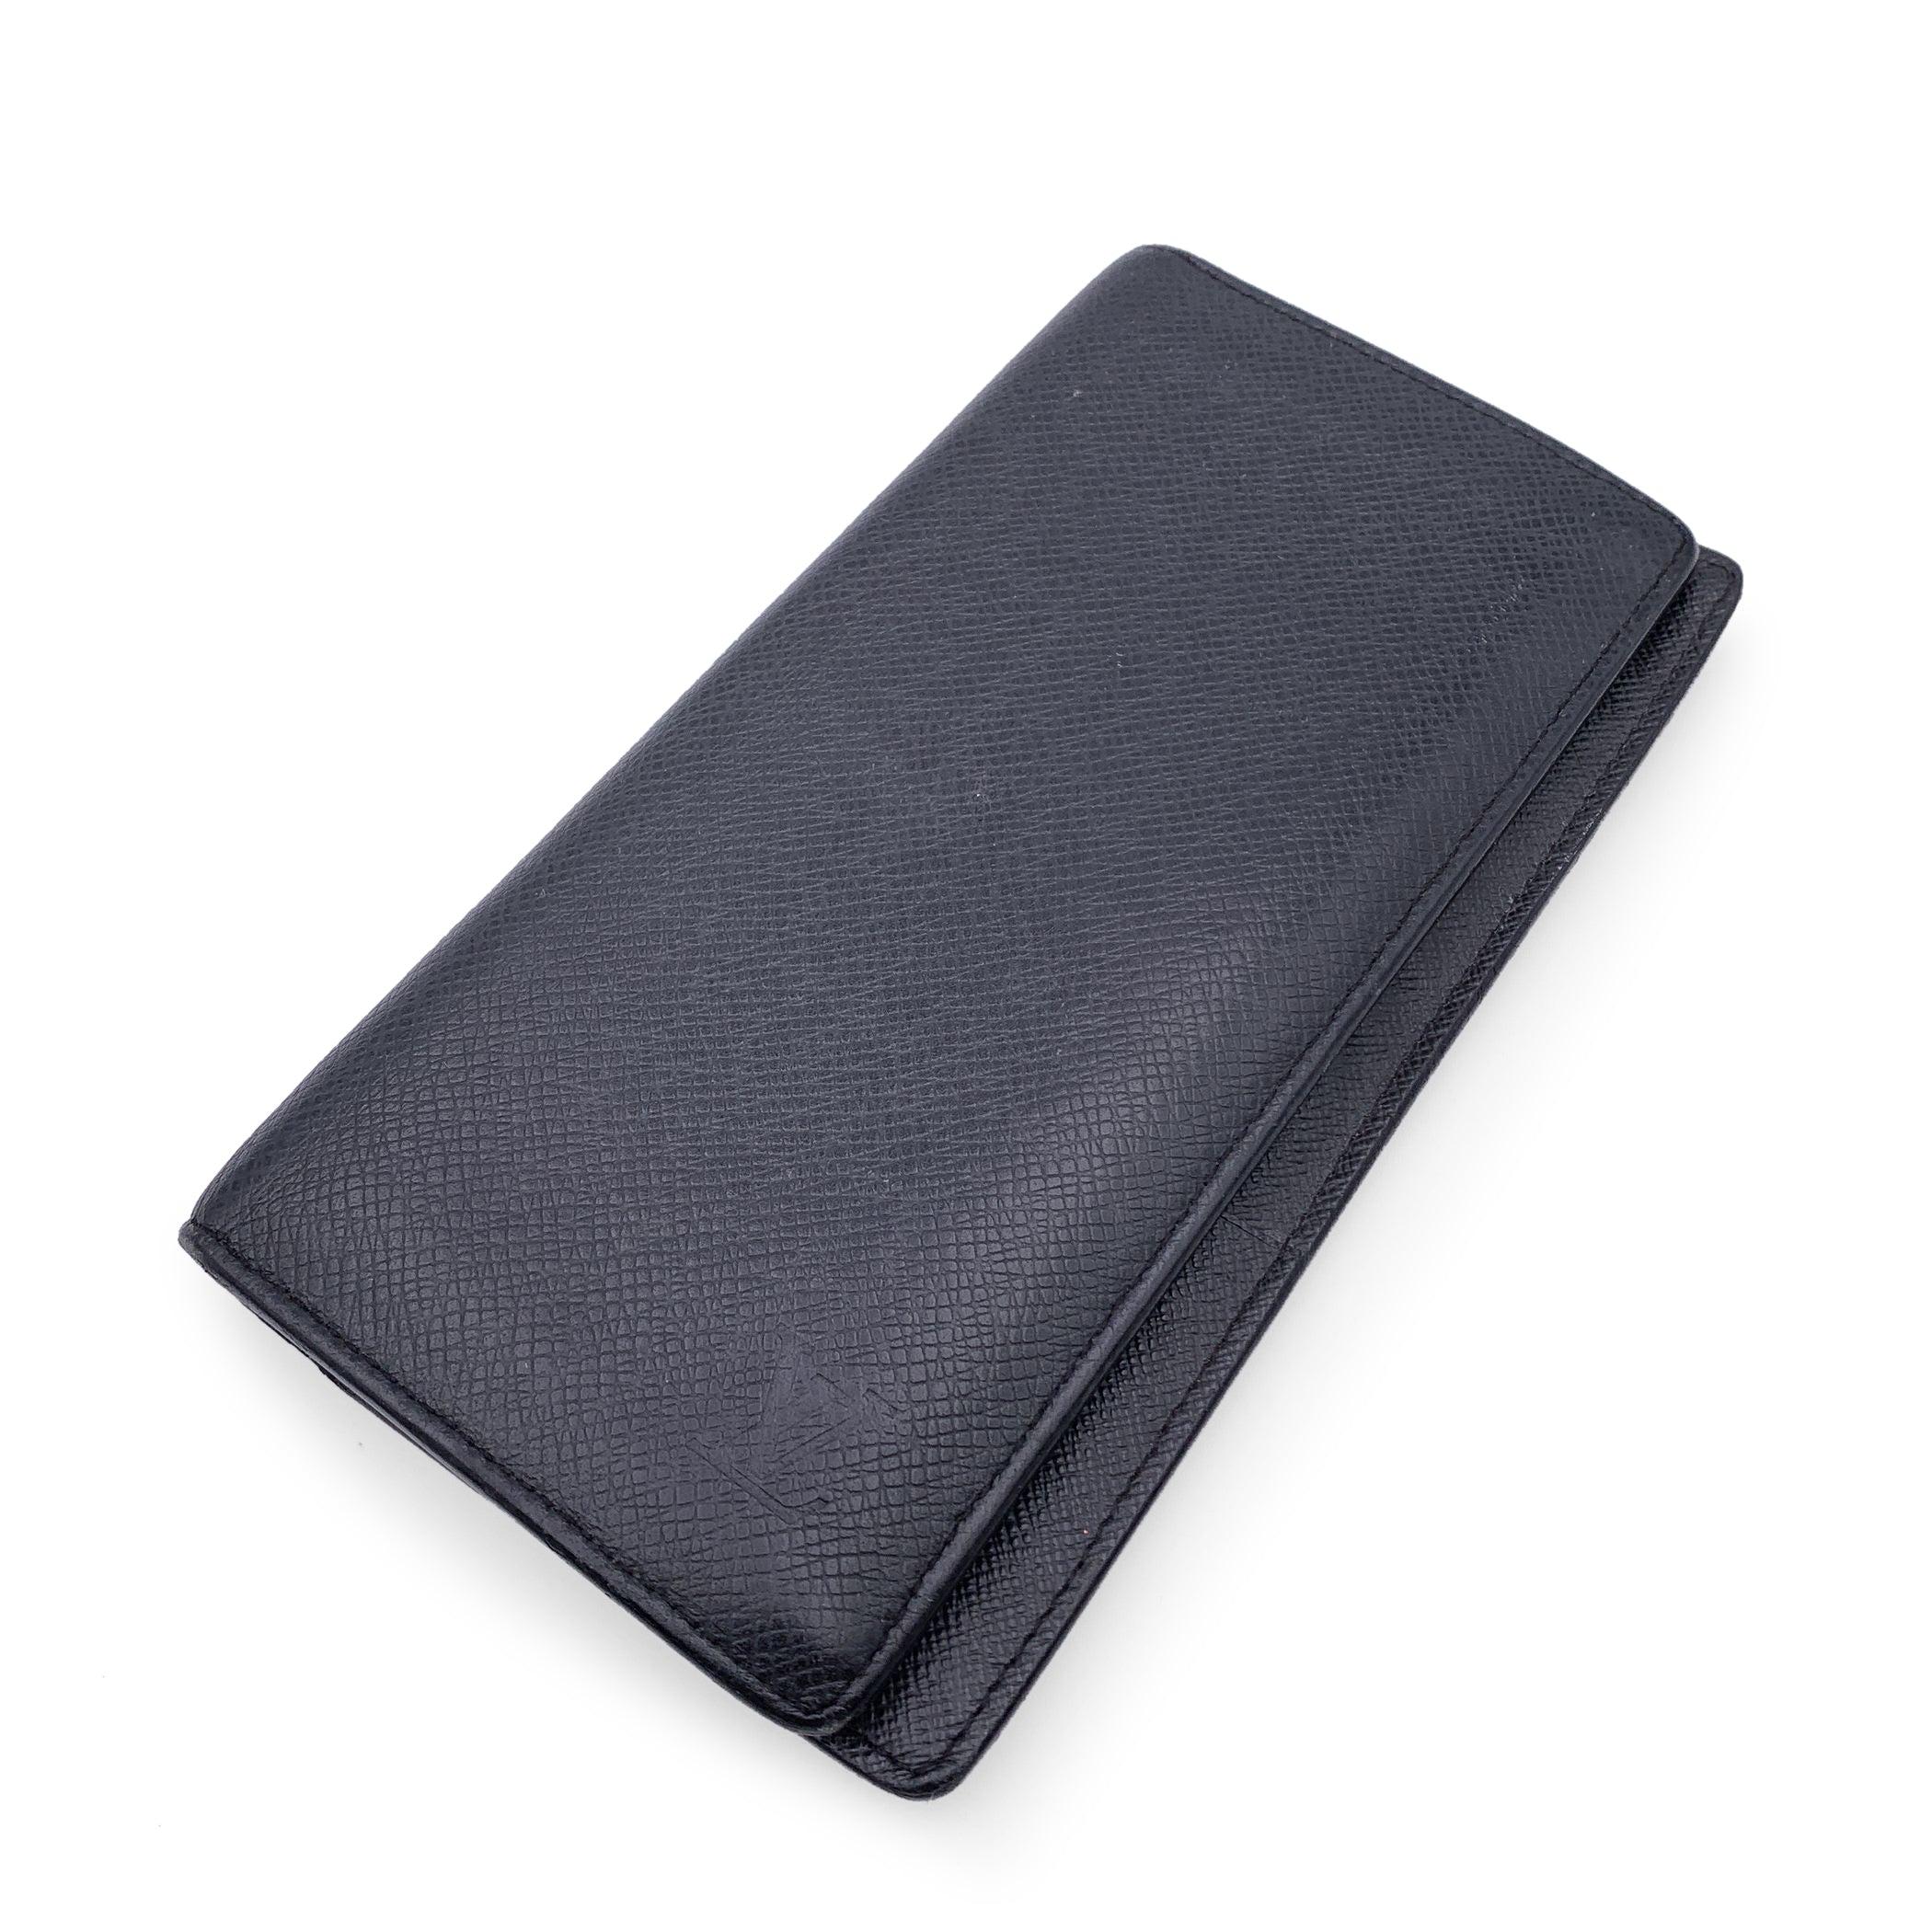 Louis Vuitton Black Taiga Long Continental Brazza Wallet. Bifold design. Leather lining. 12 credit card slots, 1 zip compartment , 3 flat pockets, 2 long compartments for bills.'LOUIS VUITTON Paris - made in France' embossed inside. Authenticity